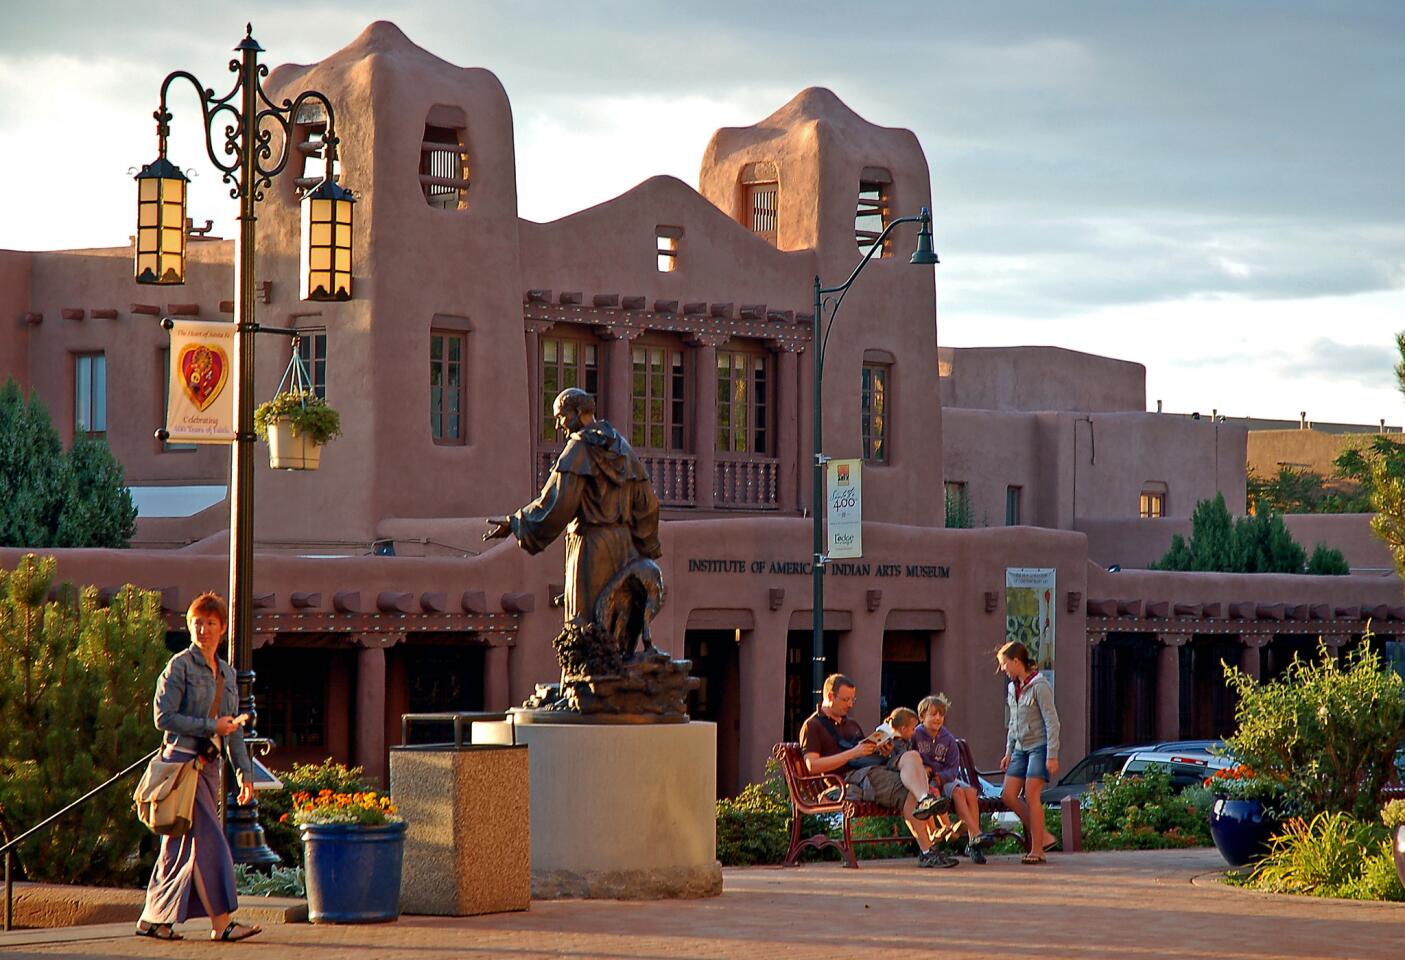 A statue of 19th century Archbishop Jean-Baptiste Lamy stands in downtown Santa Fe, across the street from the Institute of American Indian Arts Museum.